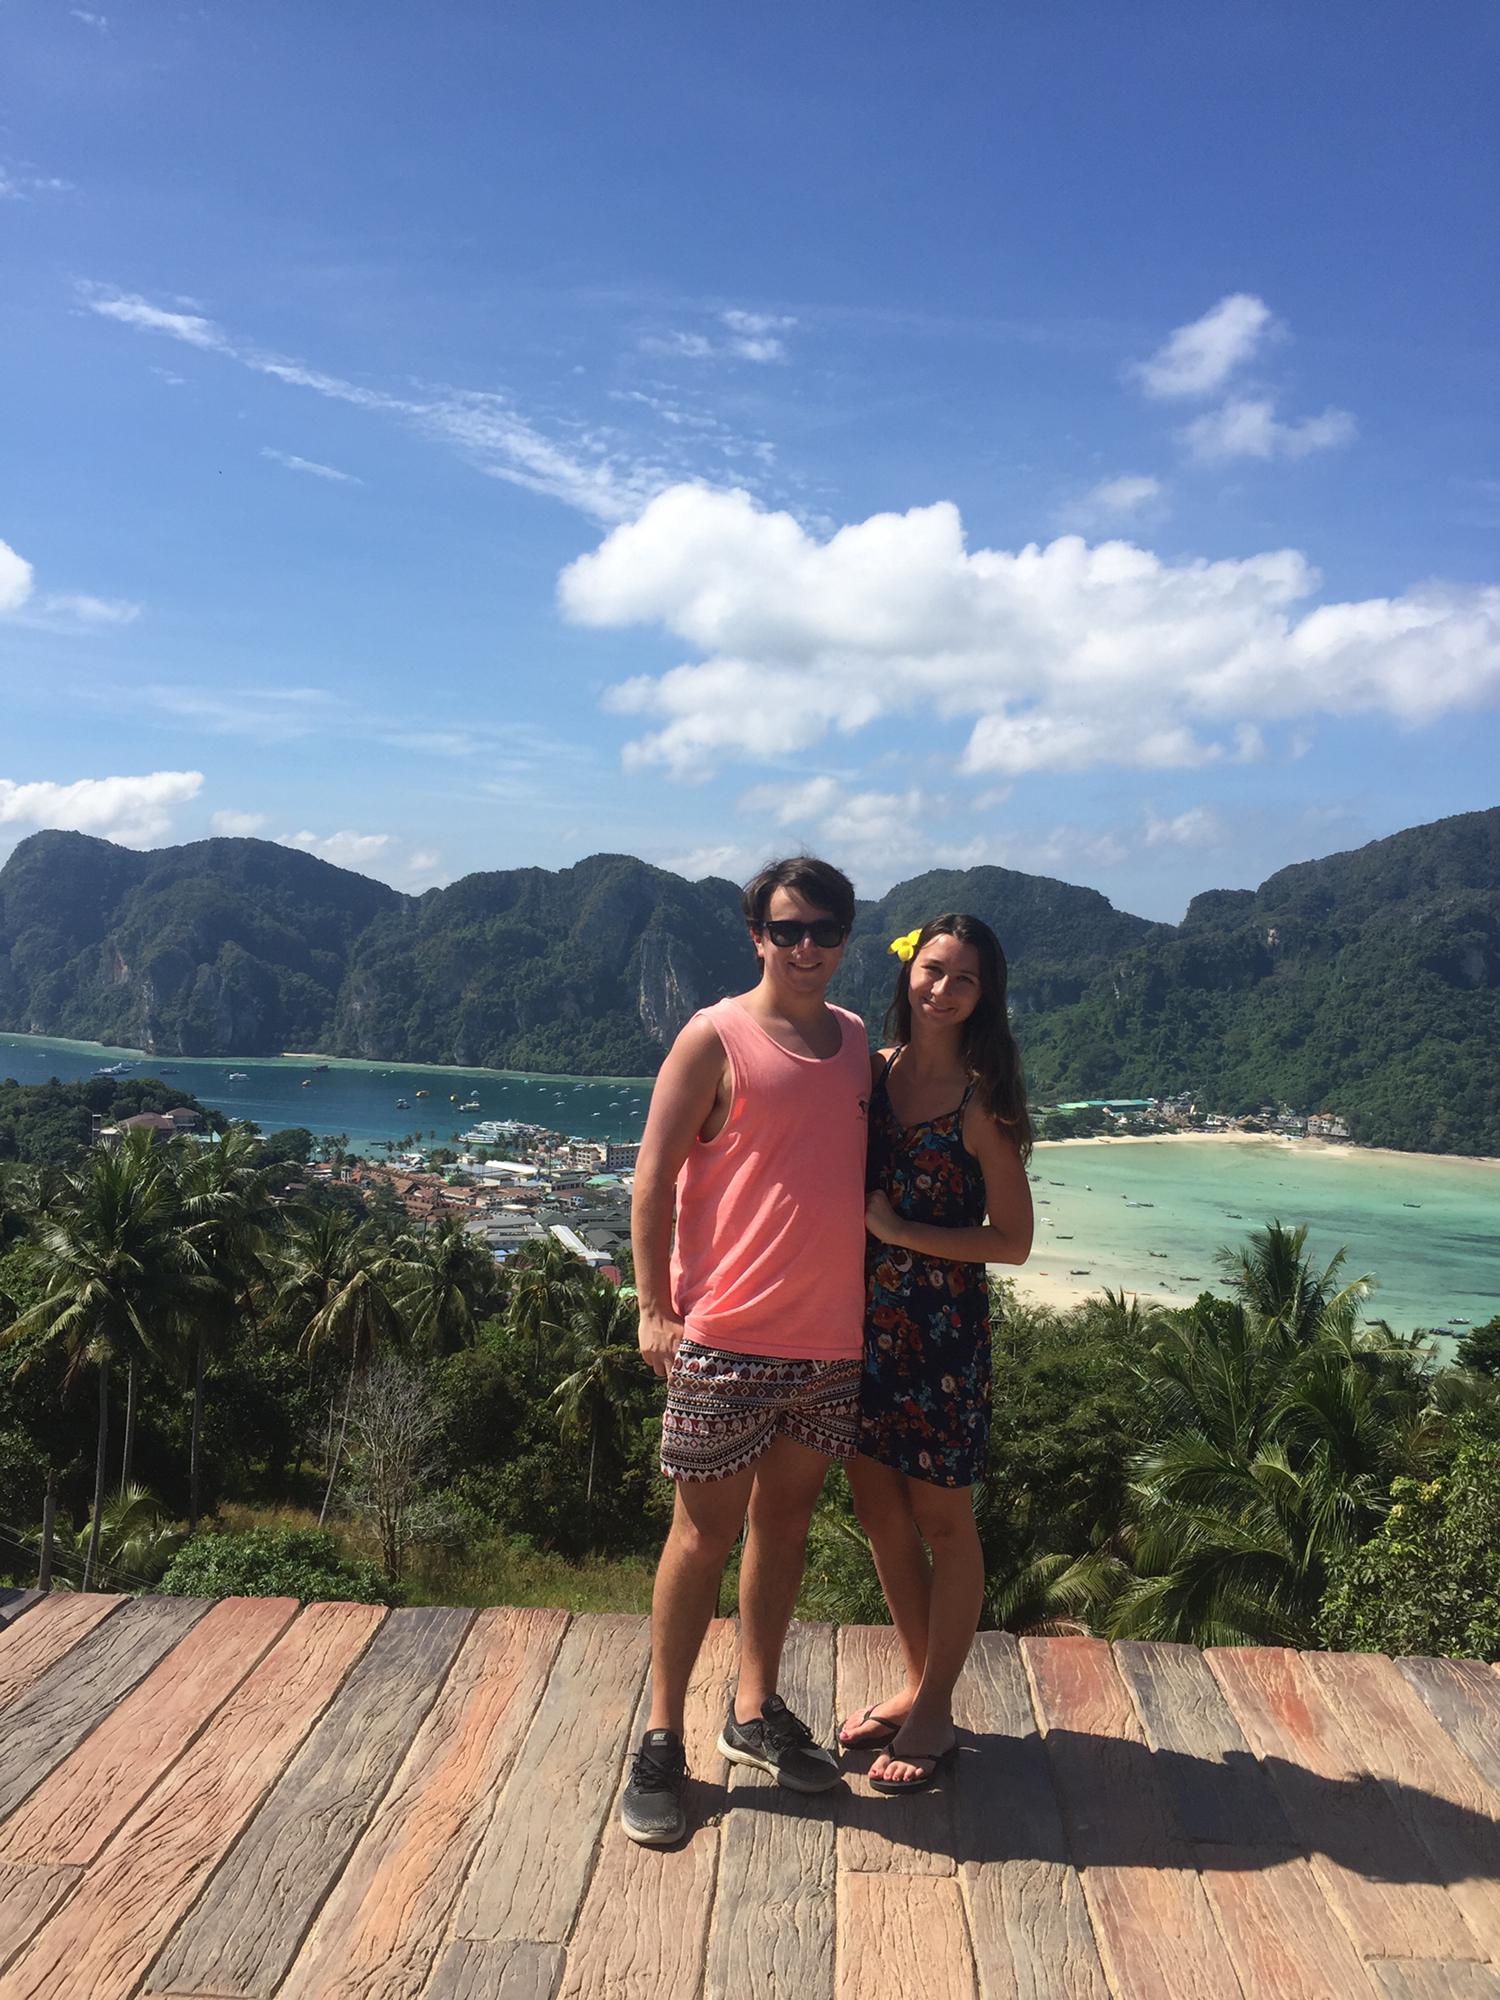 Kho Phi Phi viewpoint in Thailand